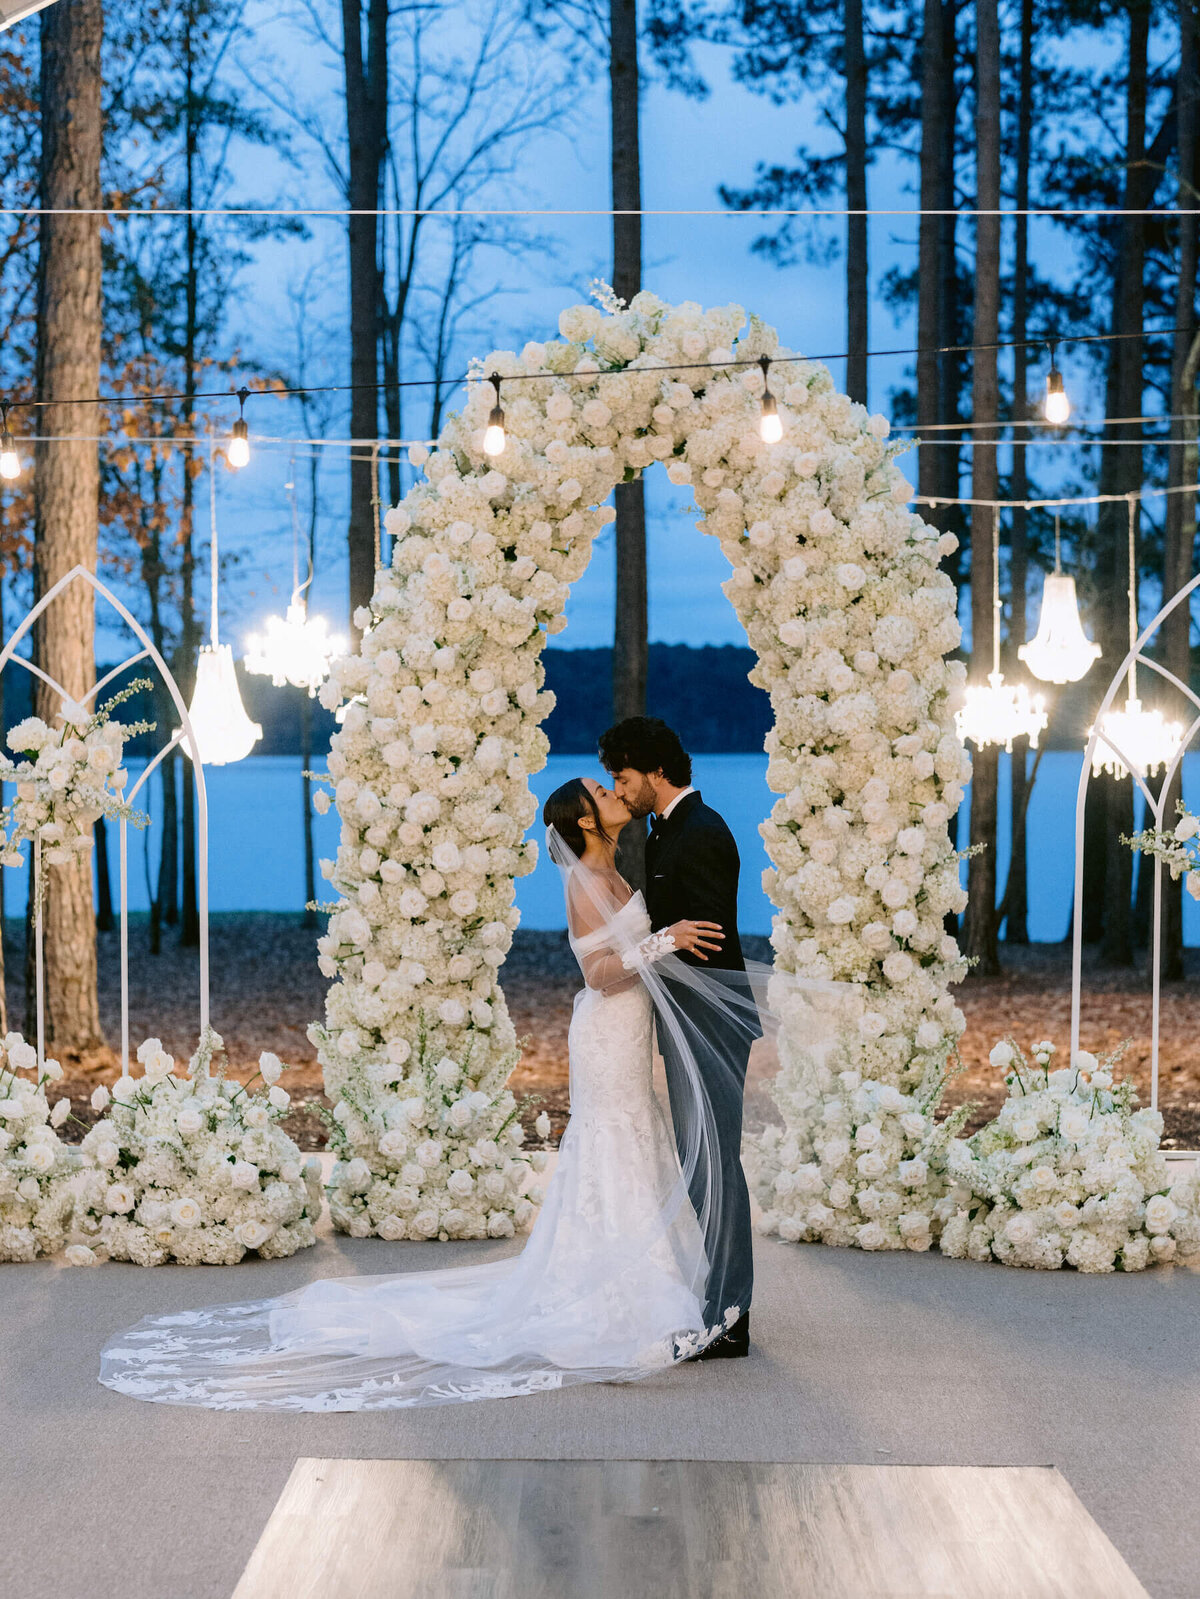 Golden hour wedding photos outside ceremony with chandeliers